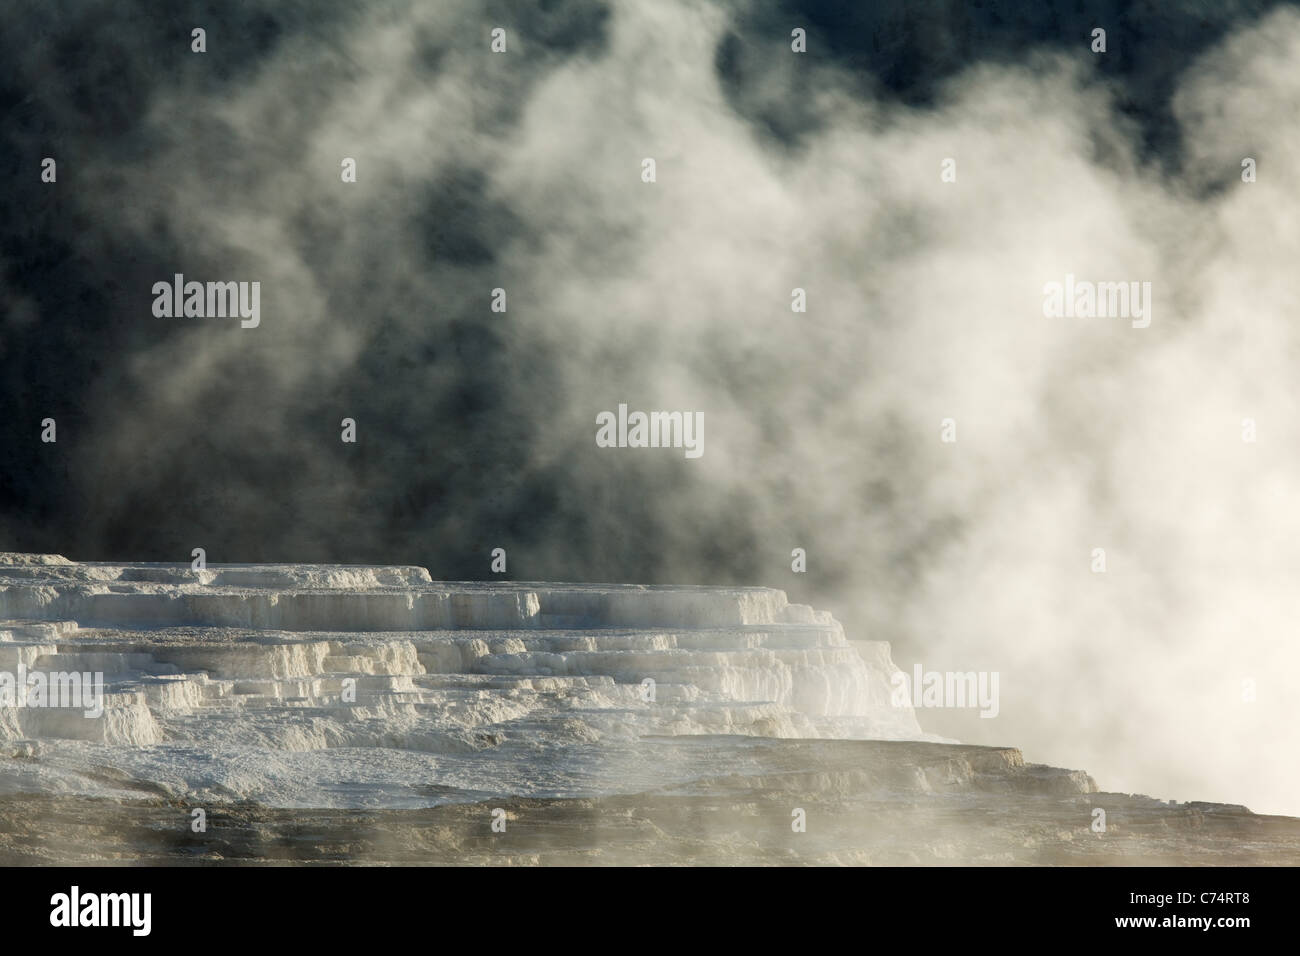 Canary Spring travertine terraces at Mammoth Hot Springs, Yellowstone National Park, Wyoming, USA Stock Photo